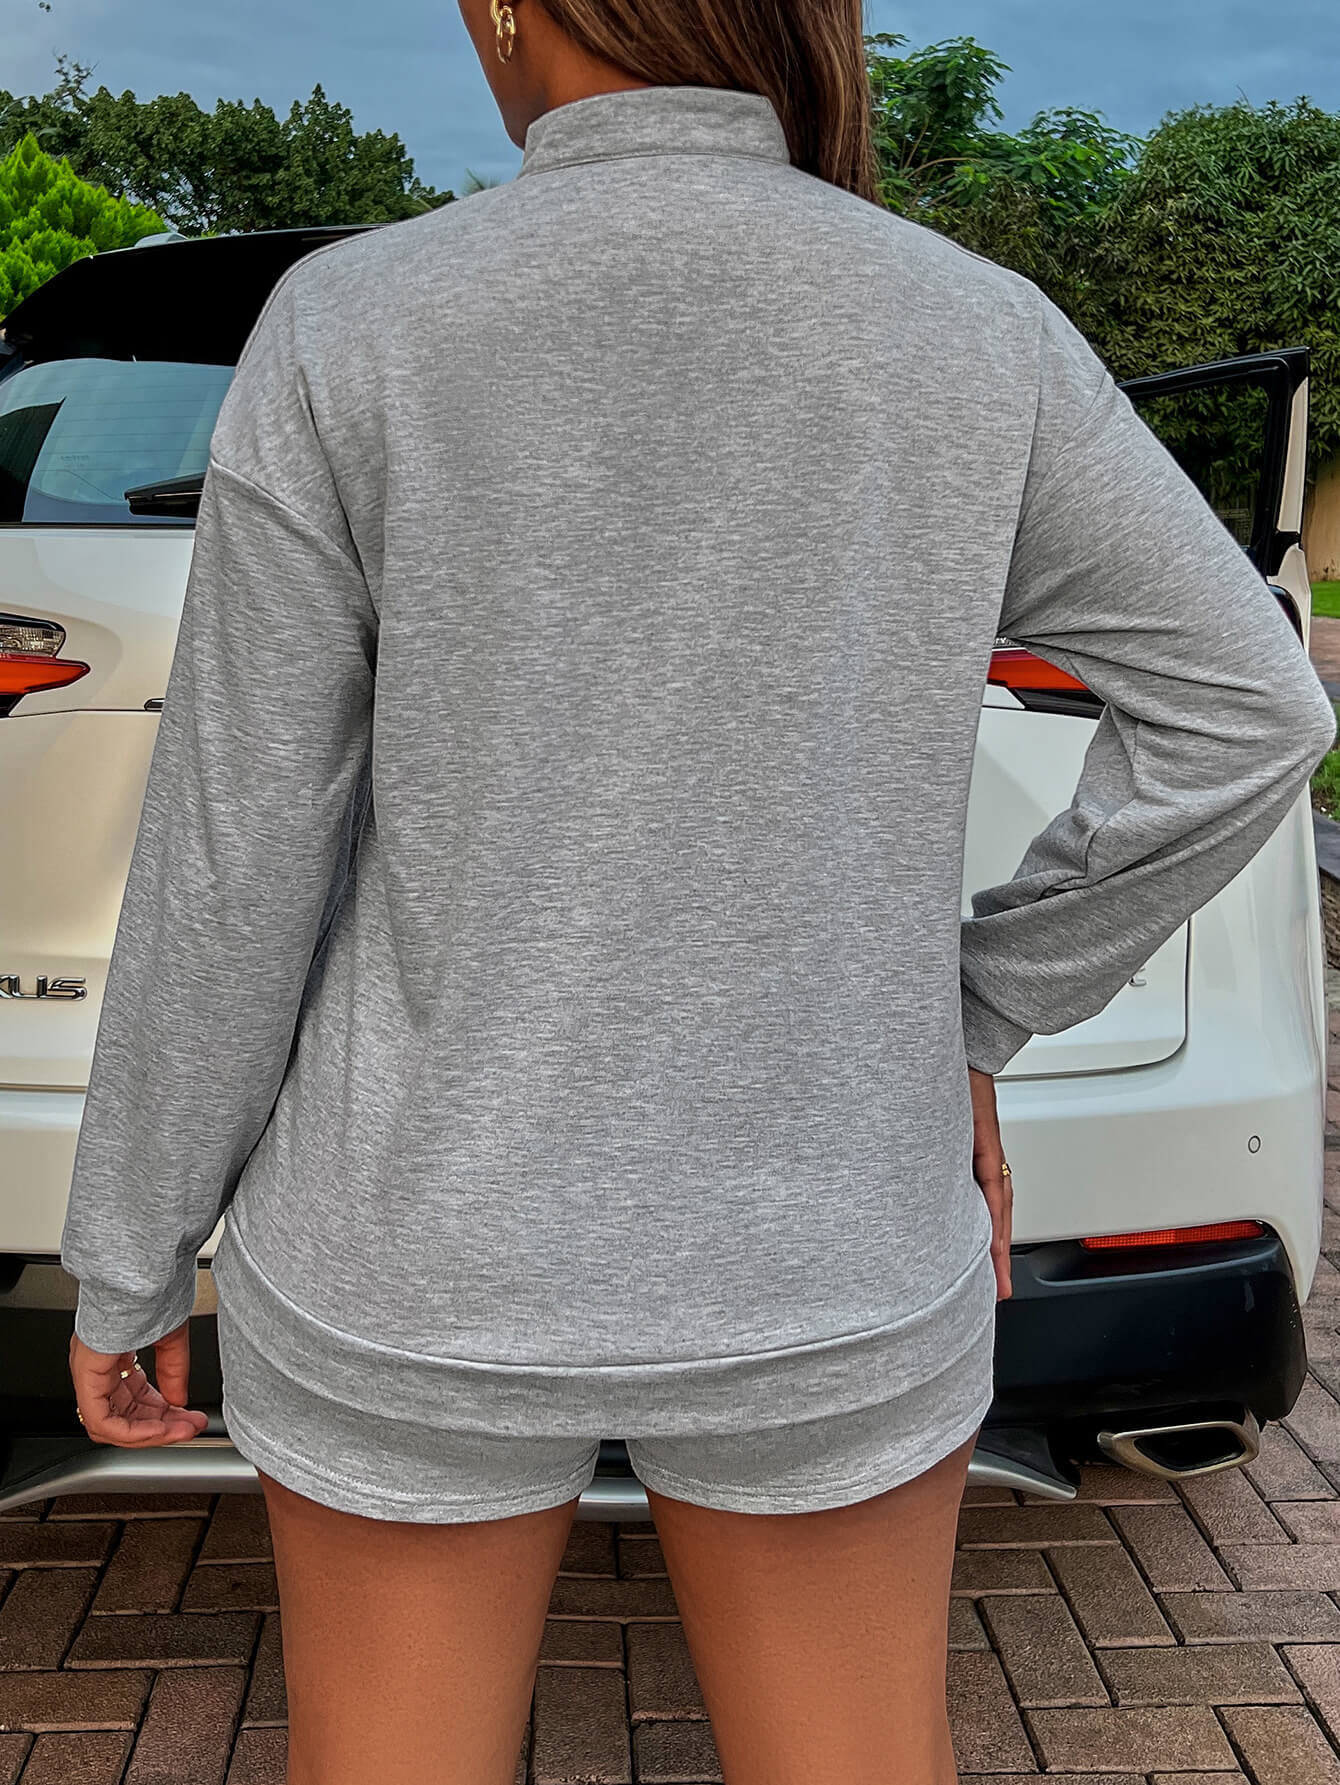 BE KIND Graphic Quarter-Zip Sweatshirt and Shorts Set Print on any thing USA/STOD clothes